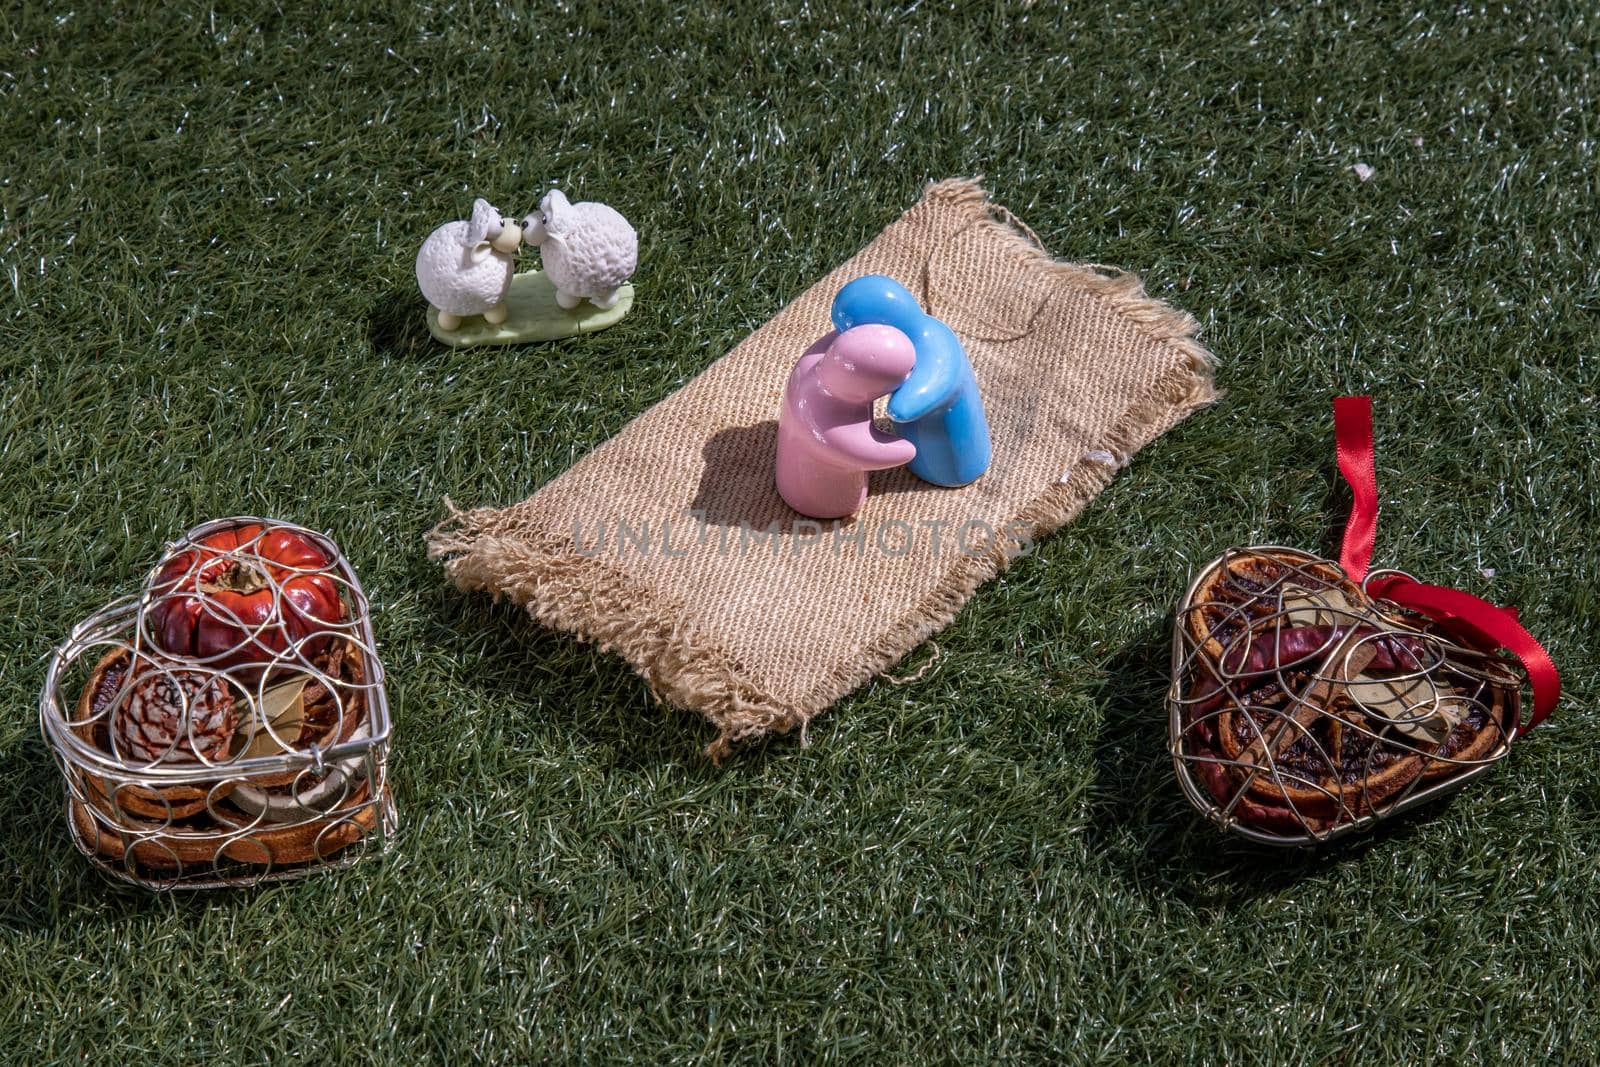 Sheep ceramic couple dolls Kissing and ceramic couple dolls hug on lawn. Love concept. by tosirikul